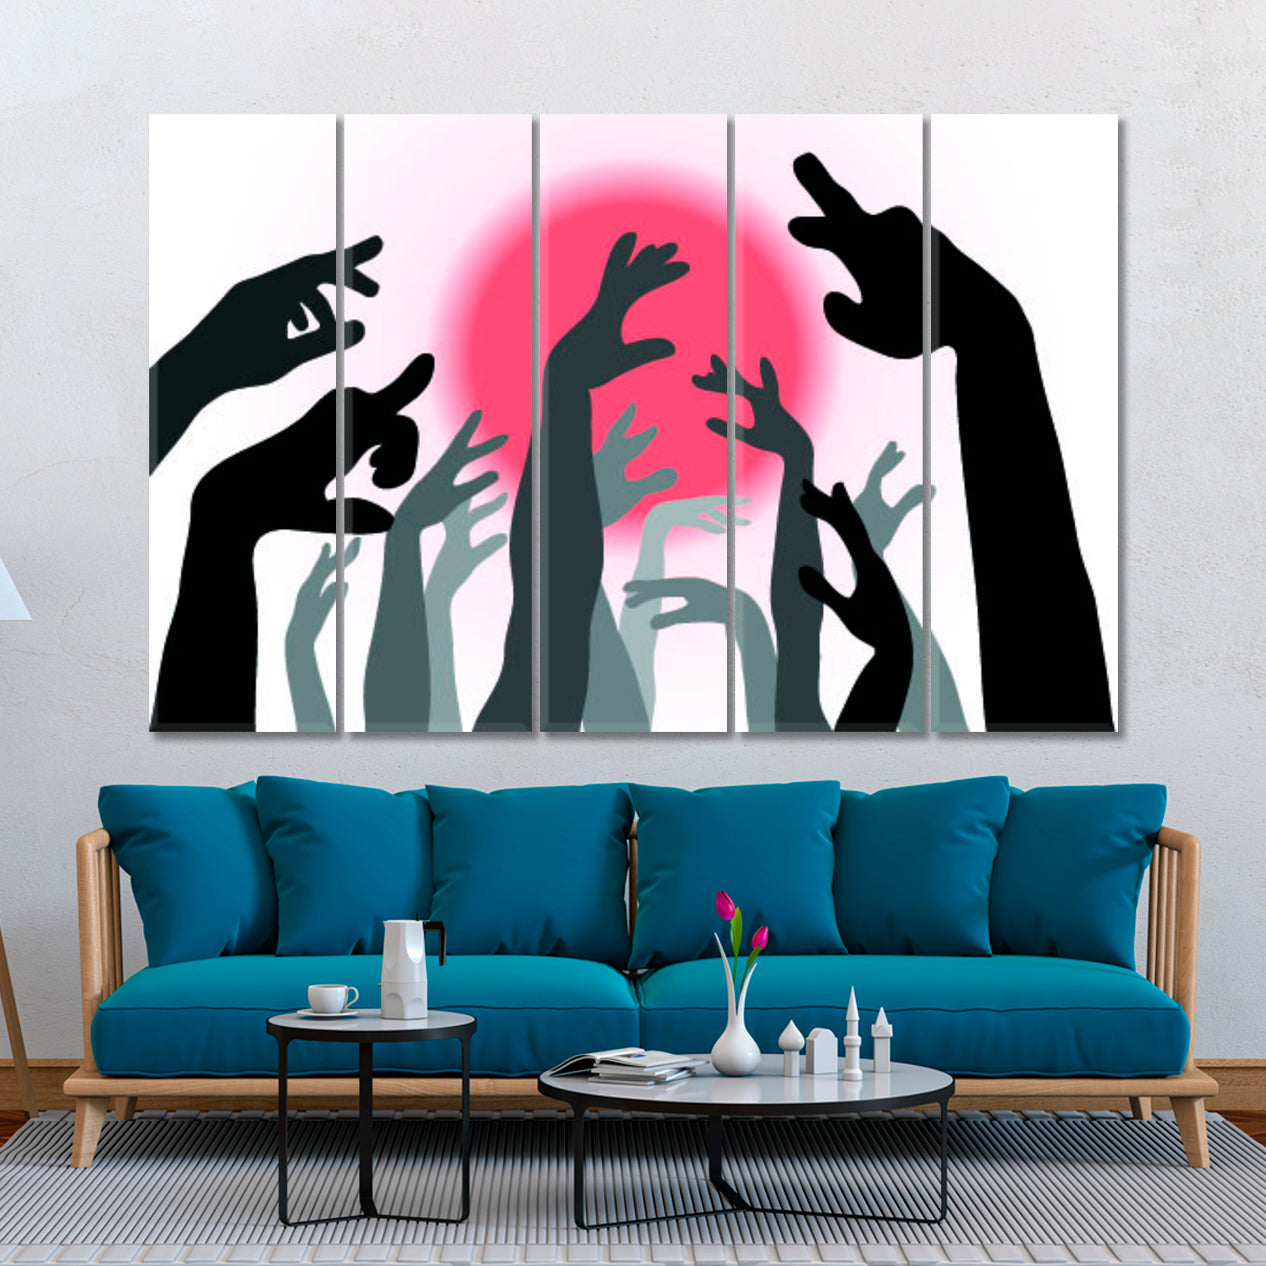 WORD LOVE HANDS Hands and Sun Silhouettes Abstract Art Print Artesty 5 panels 36" x 24" 